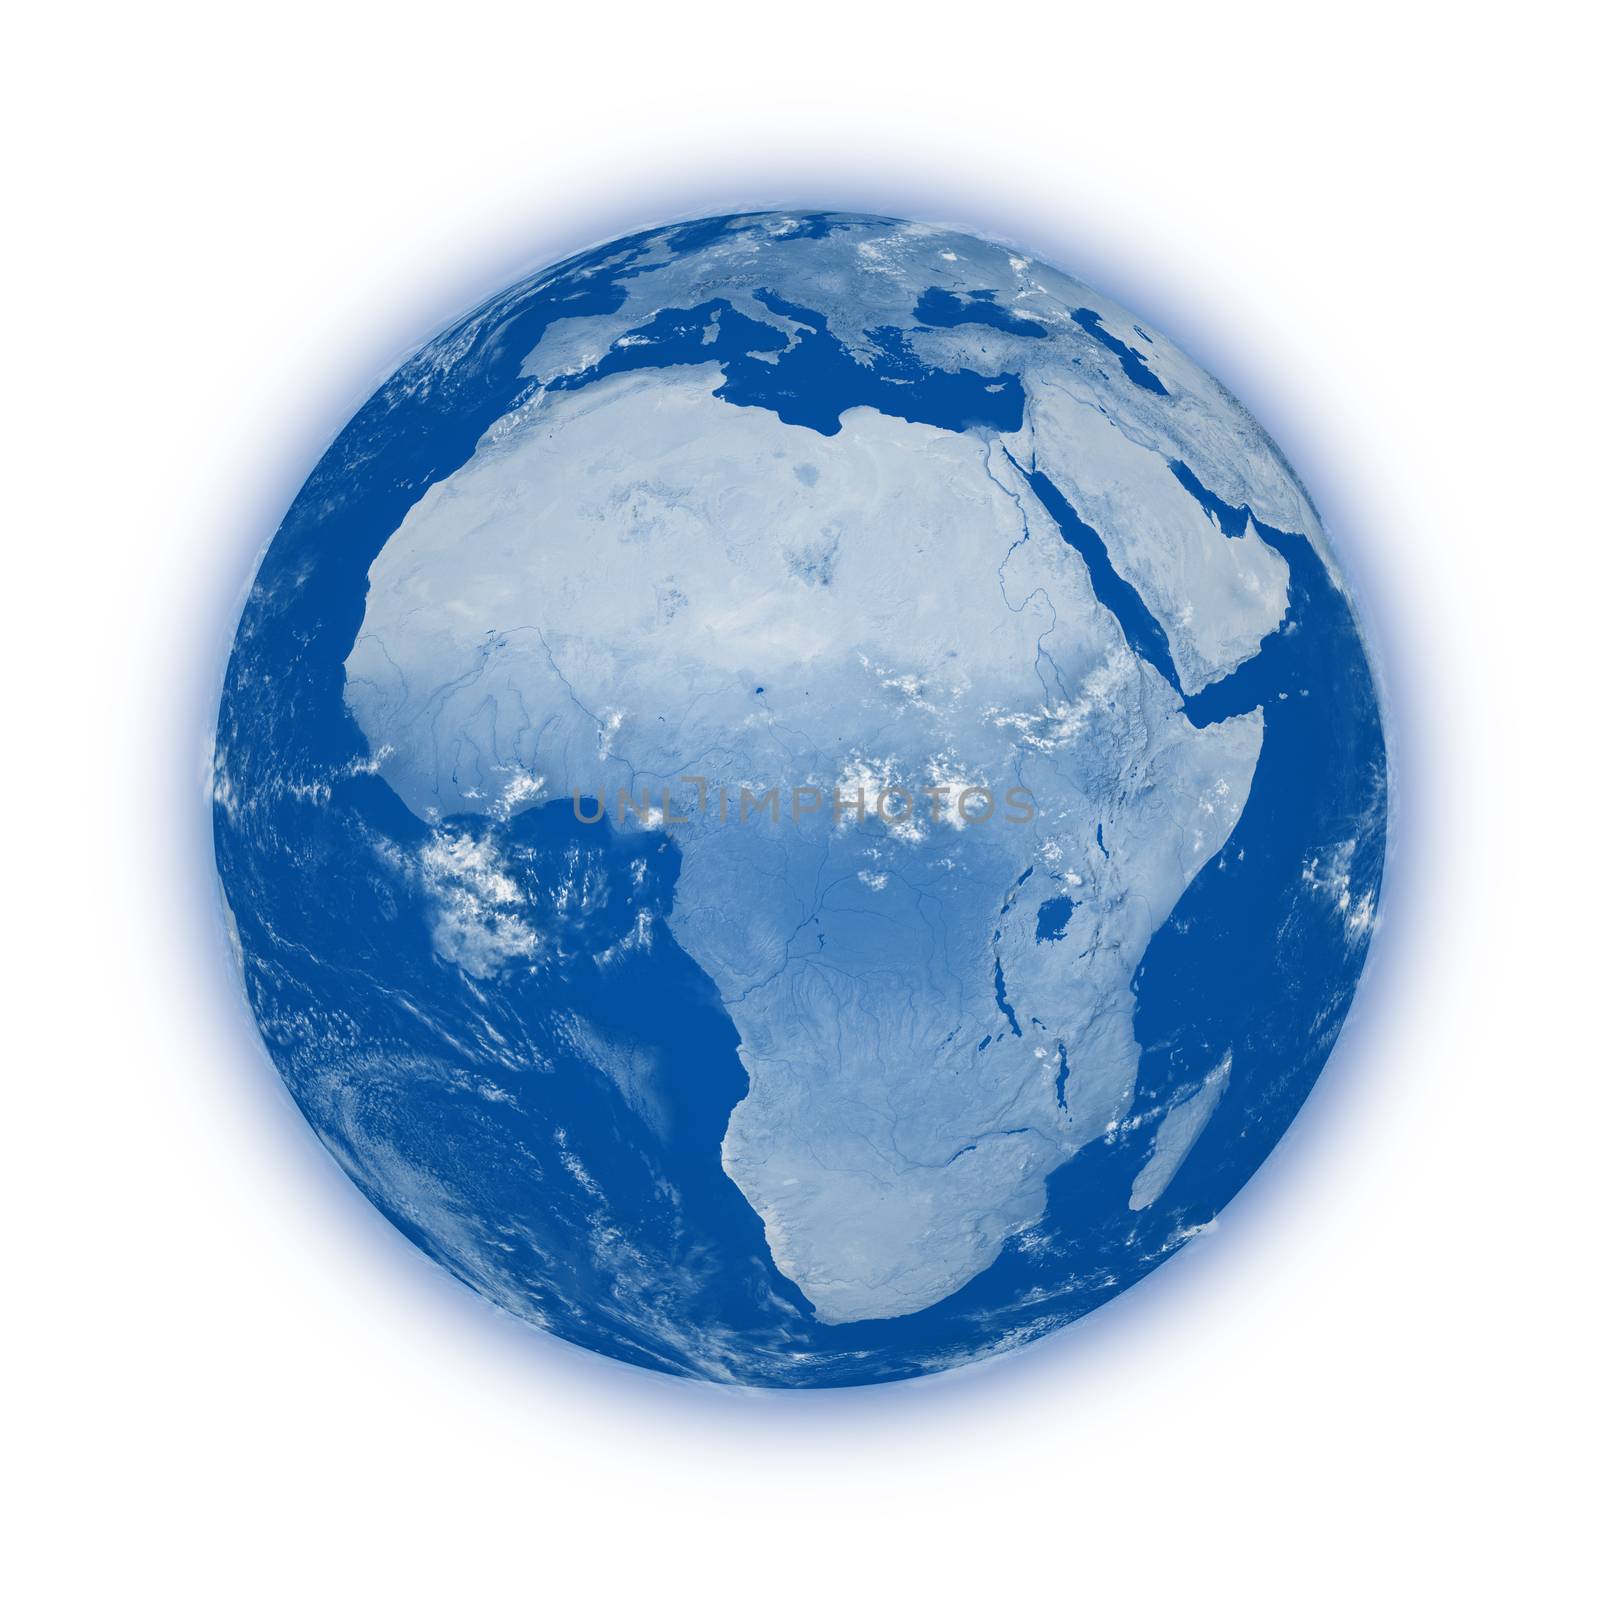 Africa on planet Earth by Harvepino